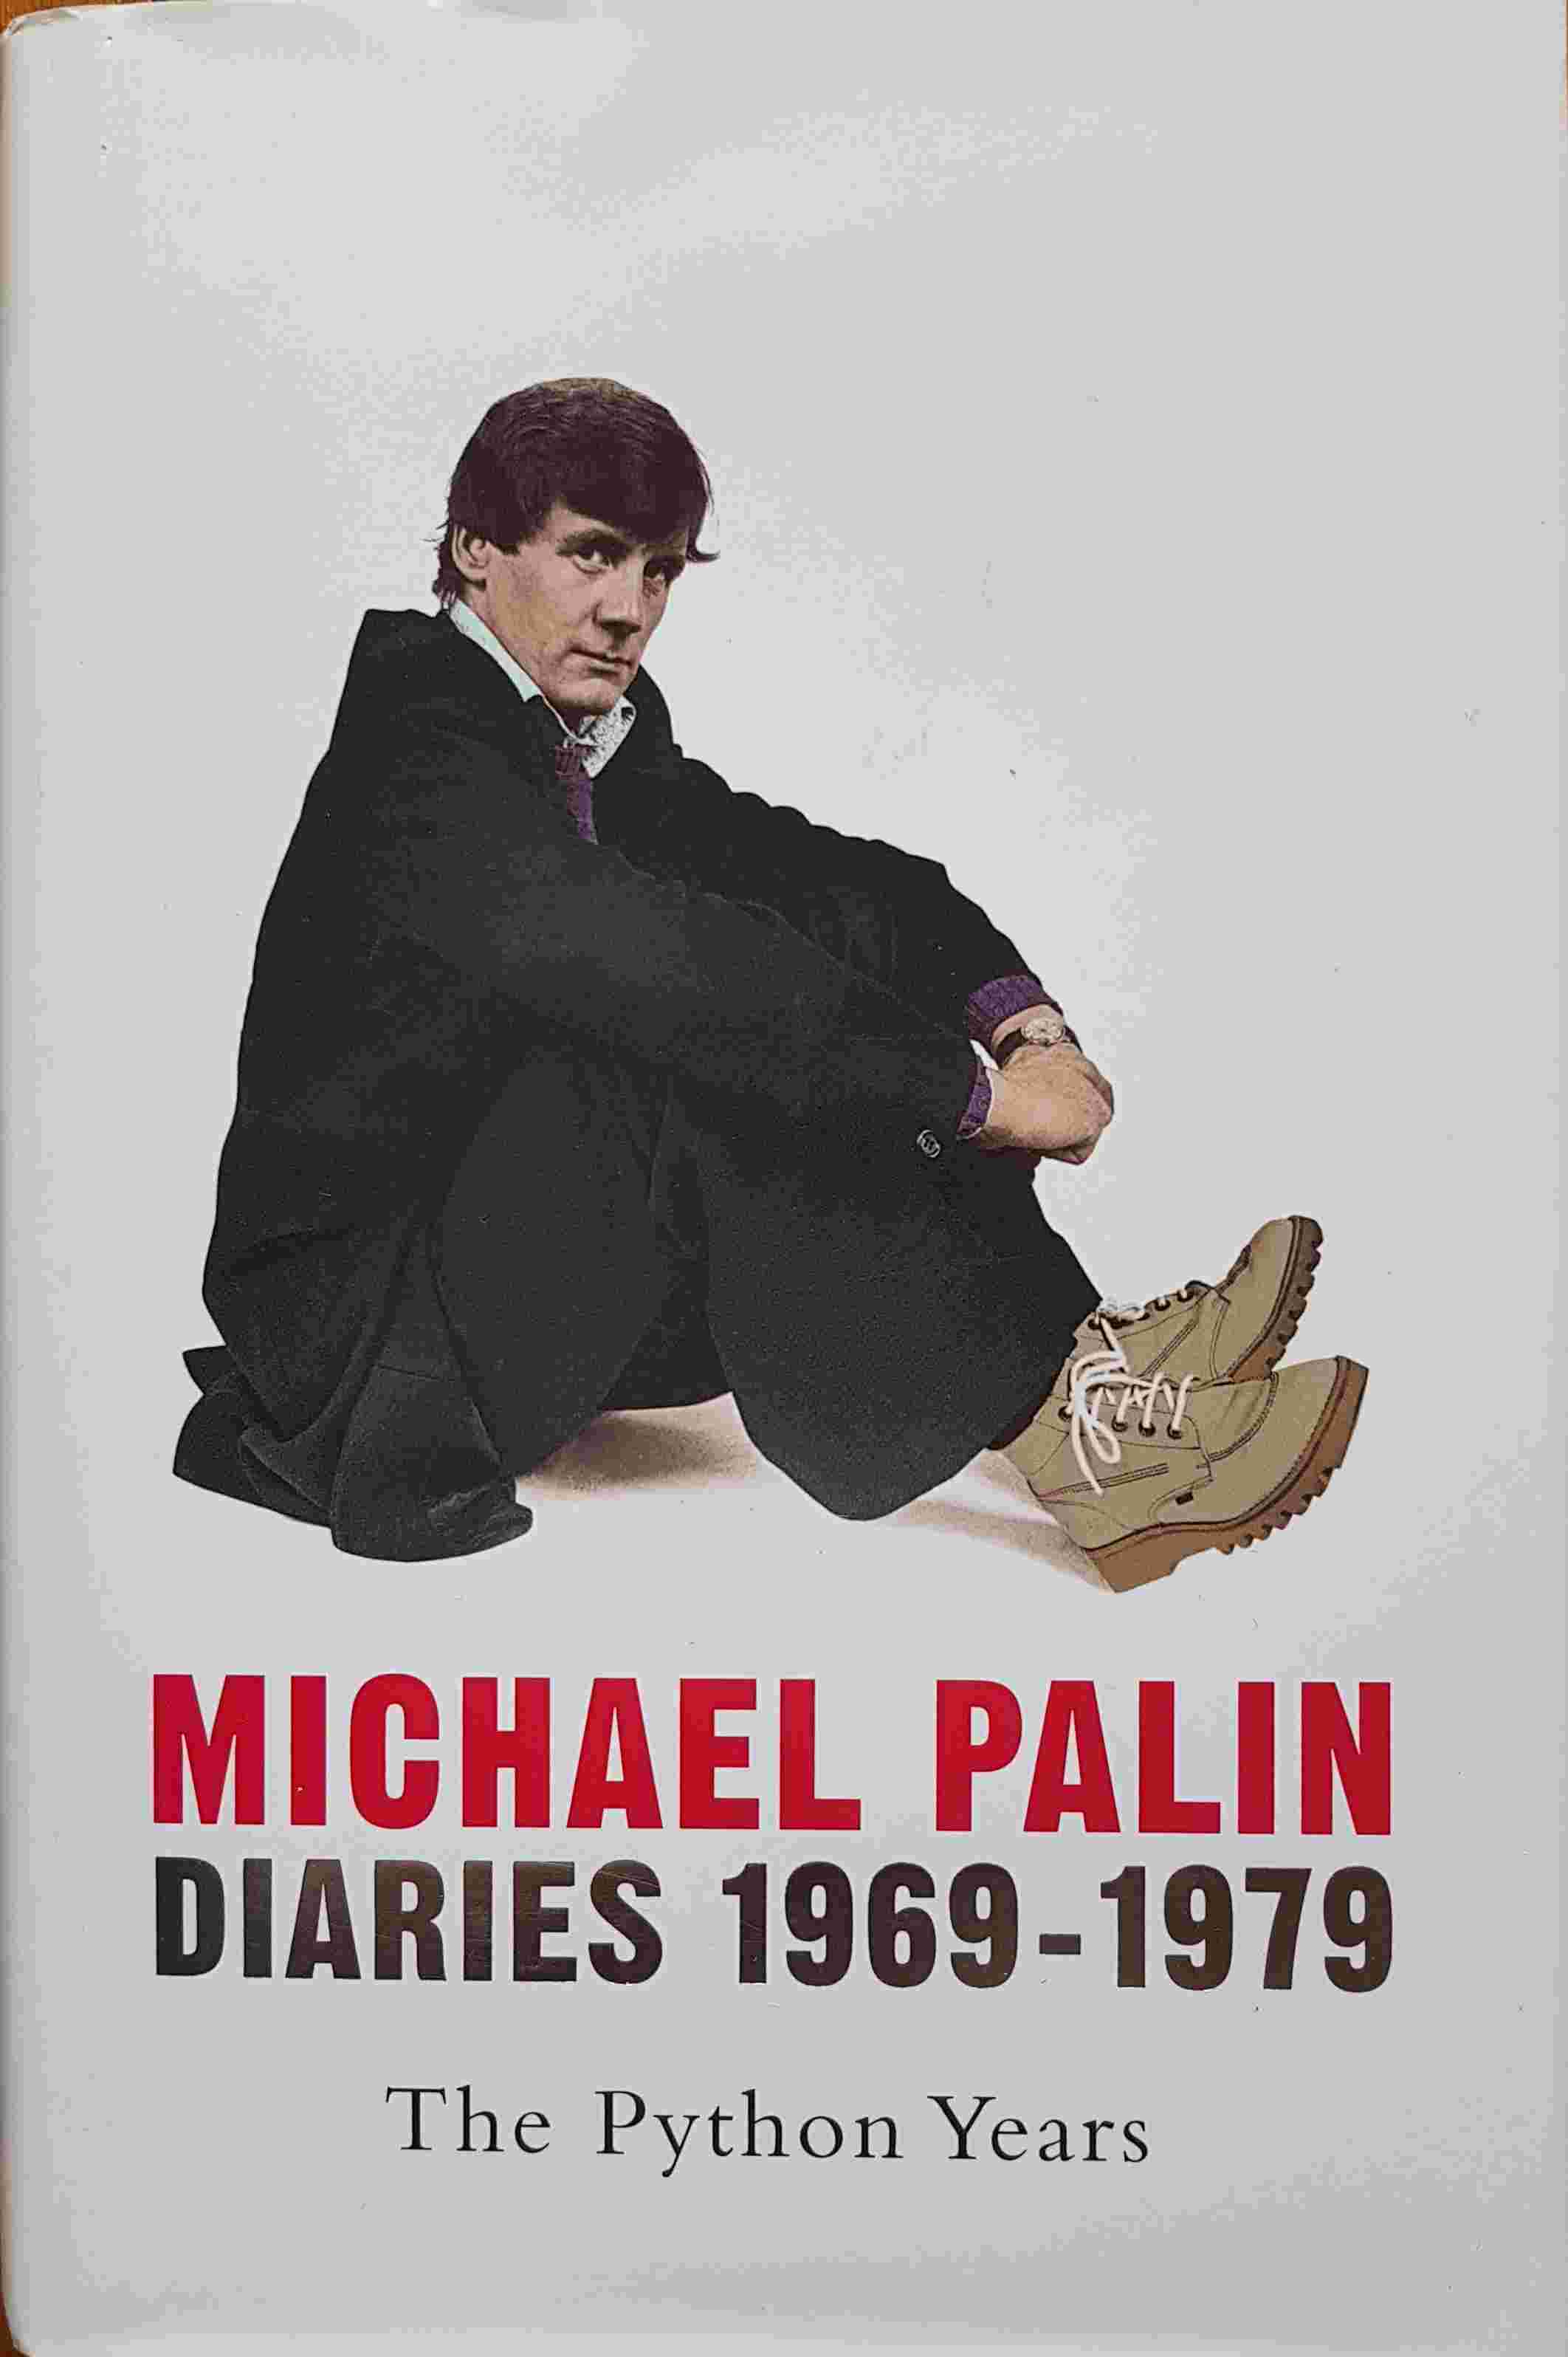 Picture of 0-297-84436-9 Michael Palin diaries 1969-1979 - The Python years by artist Michael Palin from the BBC books - Records and Tapes library